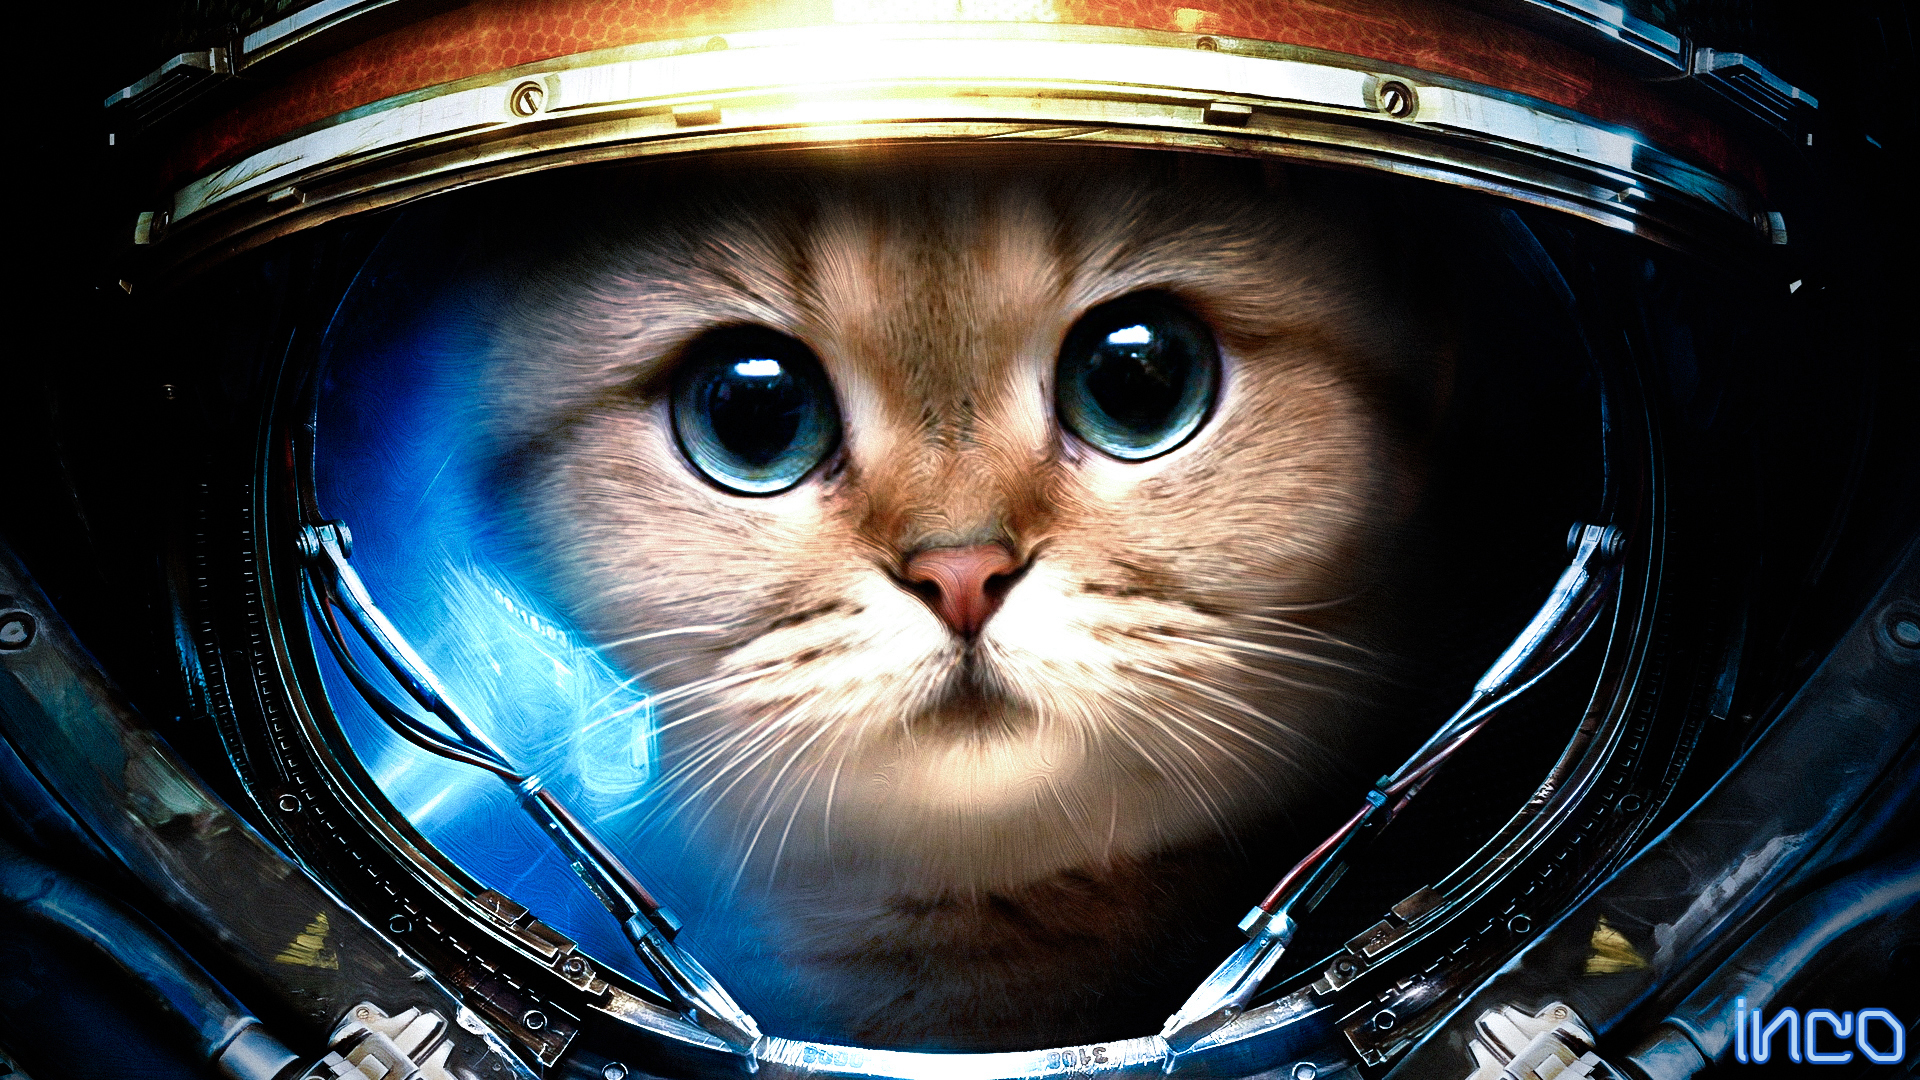 starcraft, Sci, Fi, Science, Fiction, Humor, Funny, Astronaut, Animals, Cats, Felines, Cute, Face, Eyes, Whiskers, Suit, Costume, Broken, Shatter, Crack, Artistic, Fur, Outer, Space Wallpaper